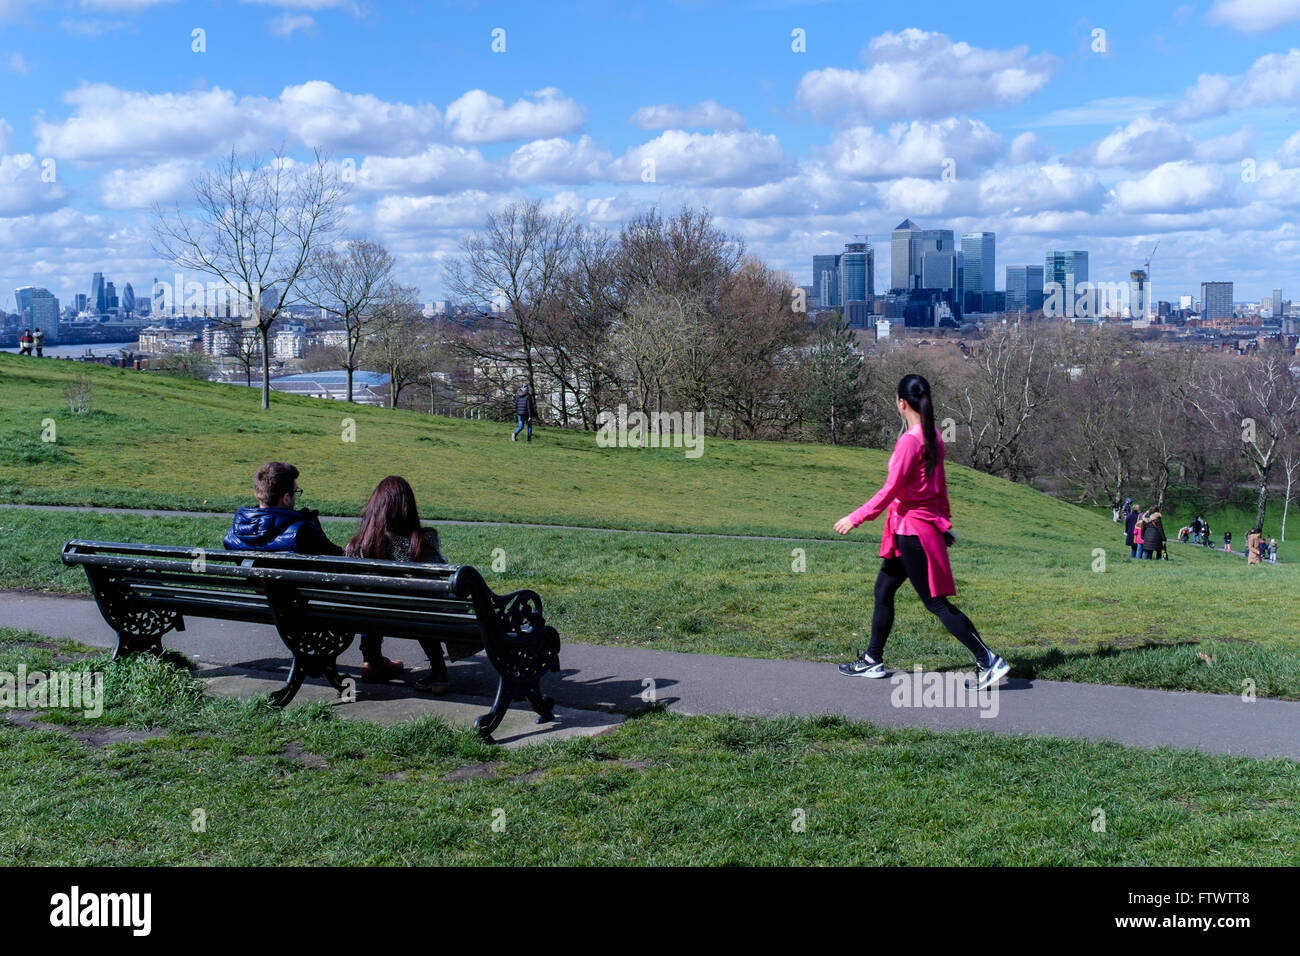 Young woman in exercise clothing walks past couple sitting on bench, Greenwich Park, London, UK Stock Photo